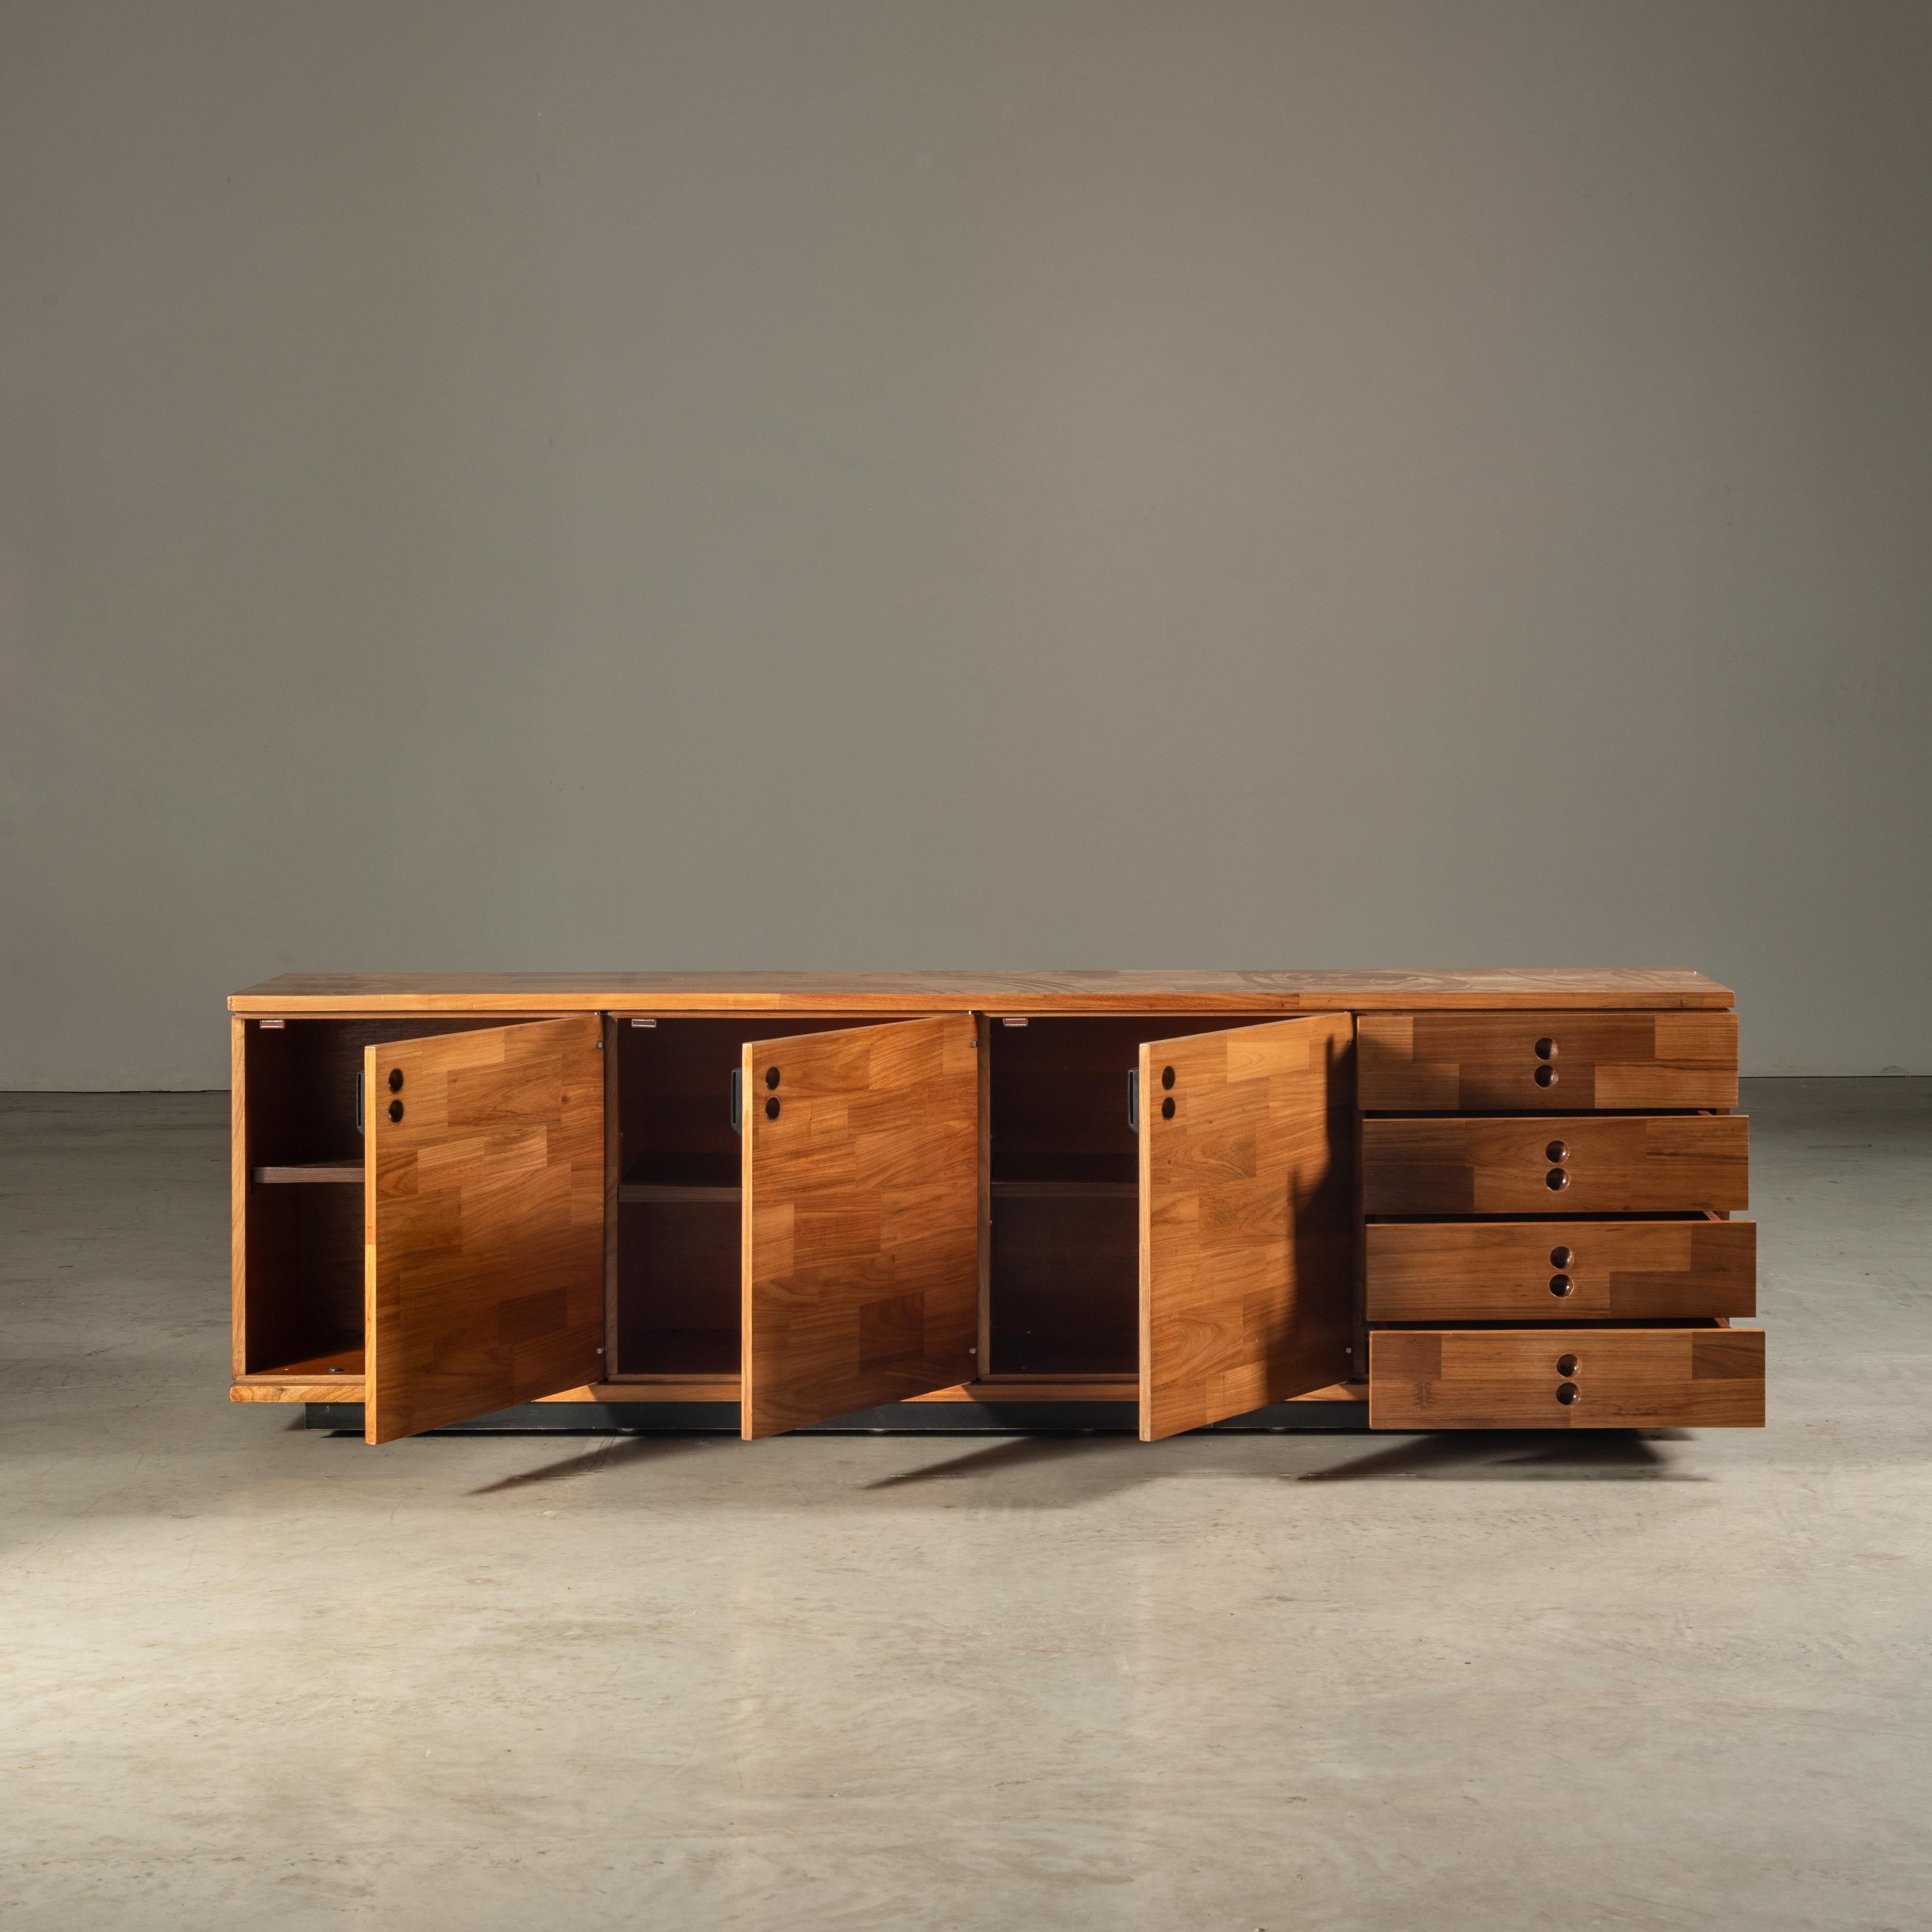 Sideboard in Patchwork Venneer, by Jorge Zalszupin, Brazilian Mid-Century Modern In Good Condition For Sale In Sao Paulo, SP